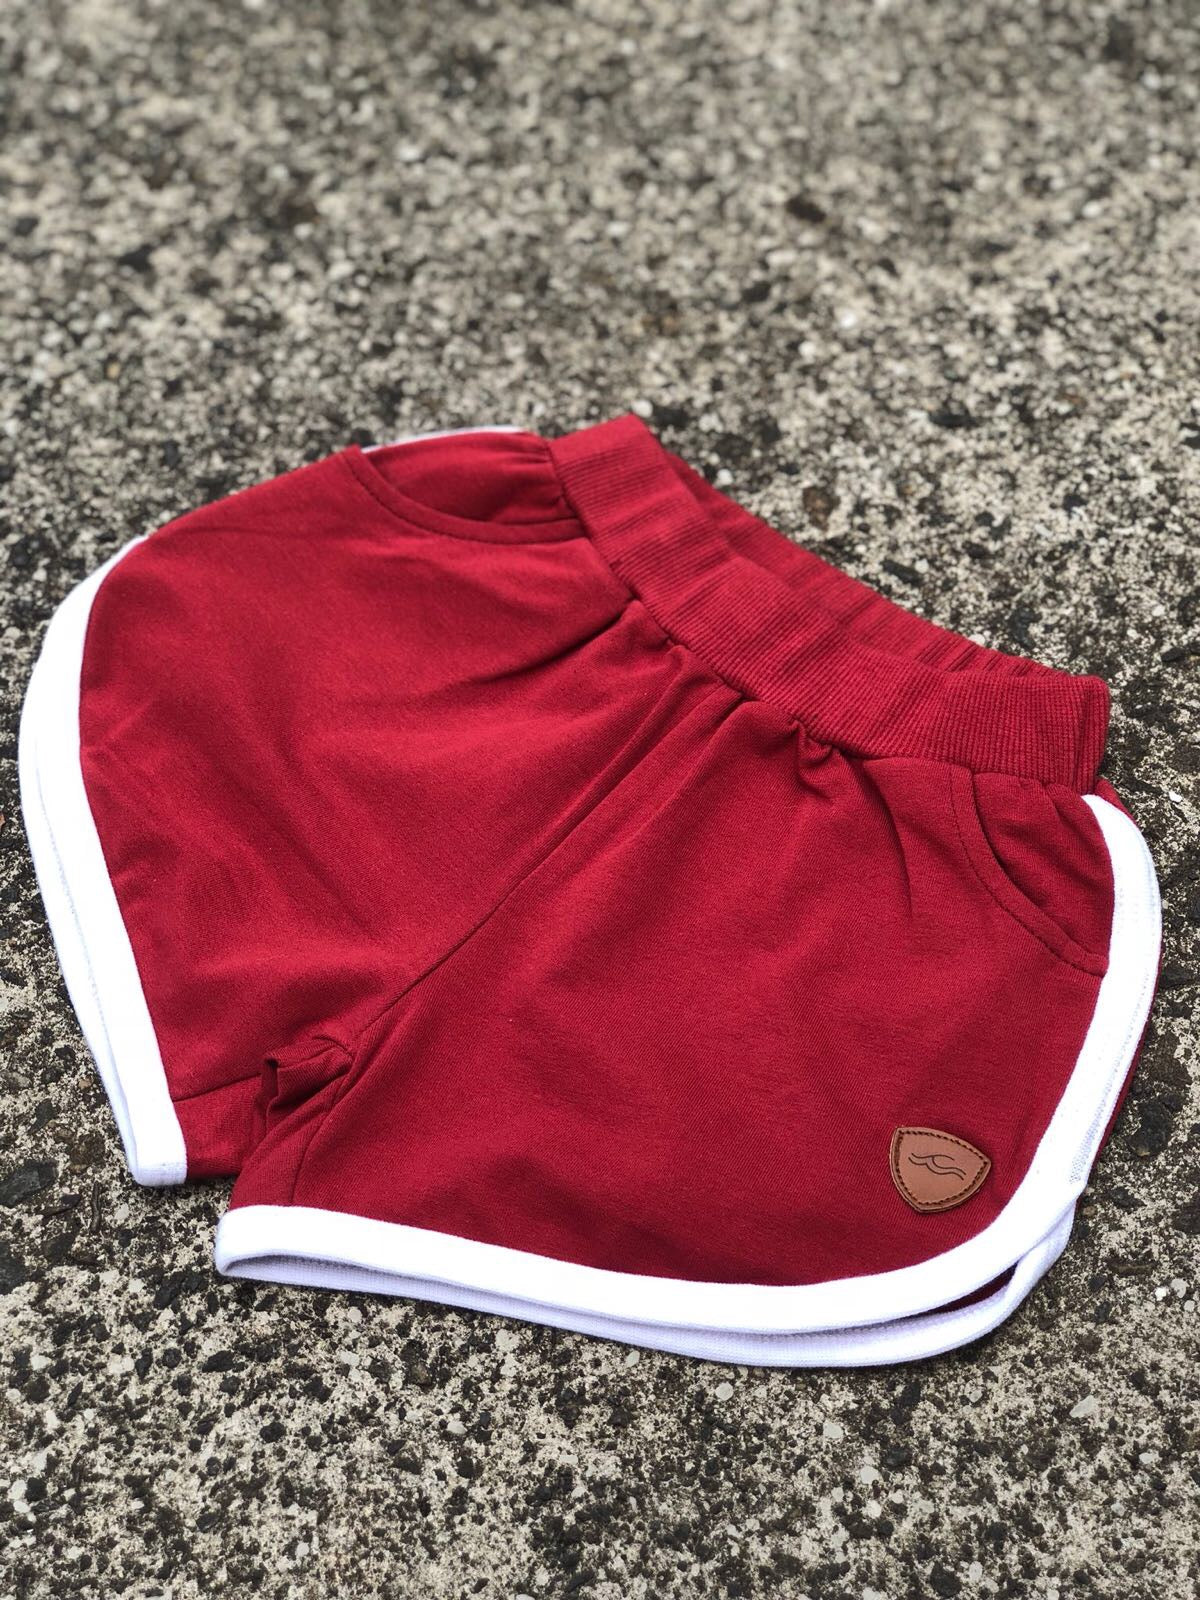 Cheeky Shorts - Red